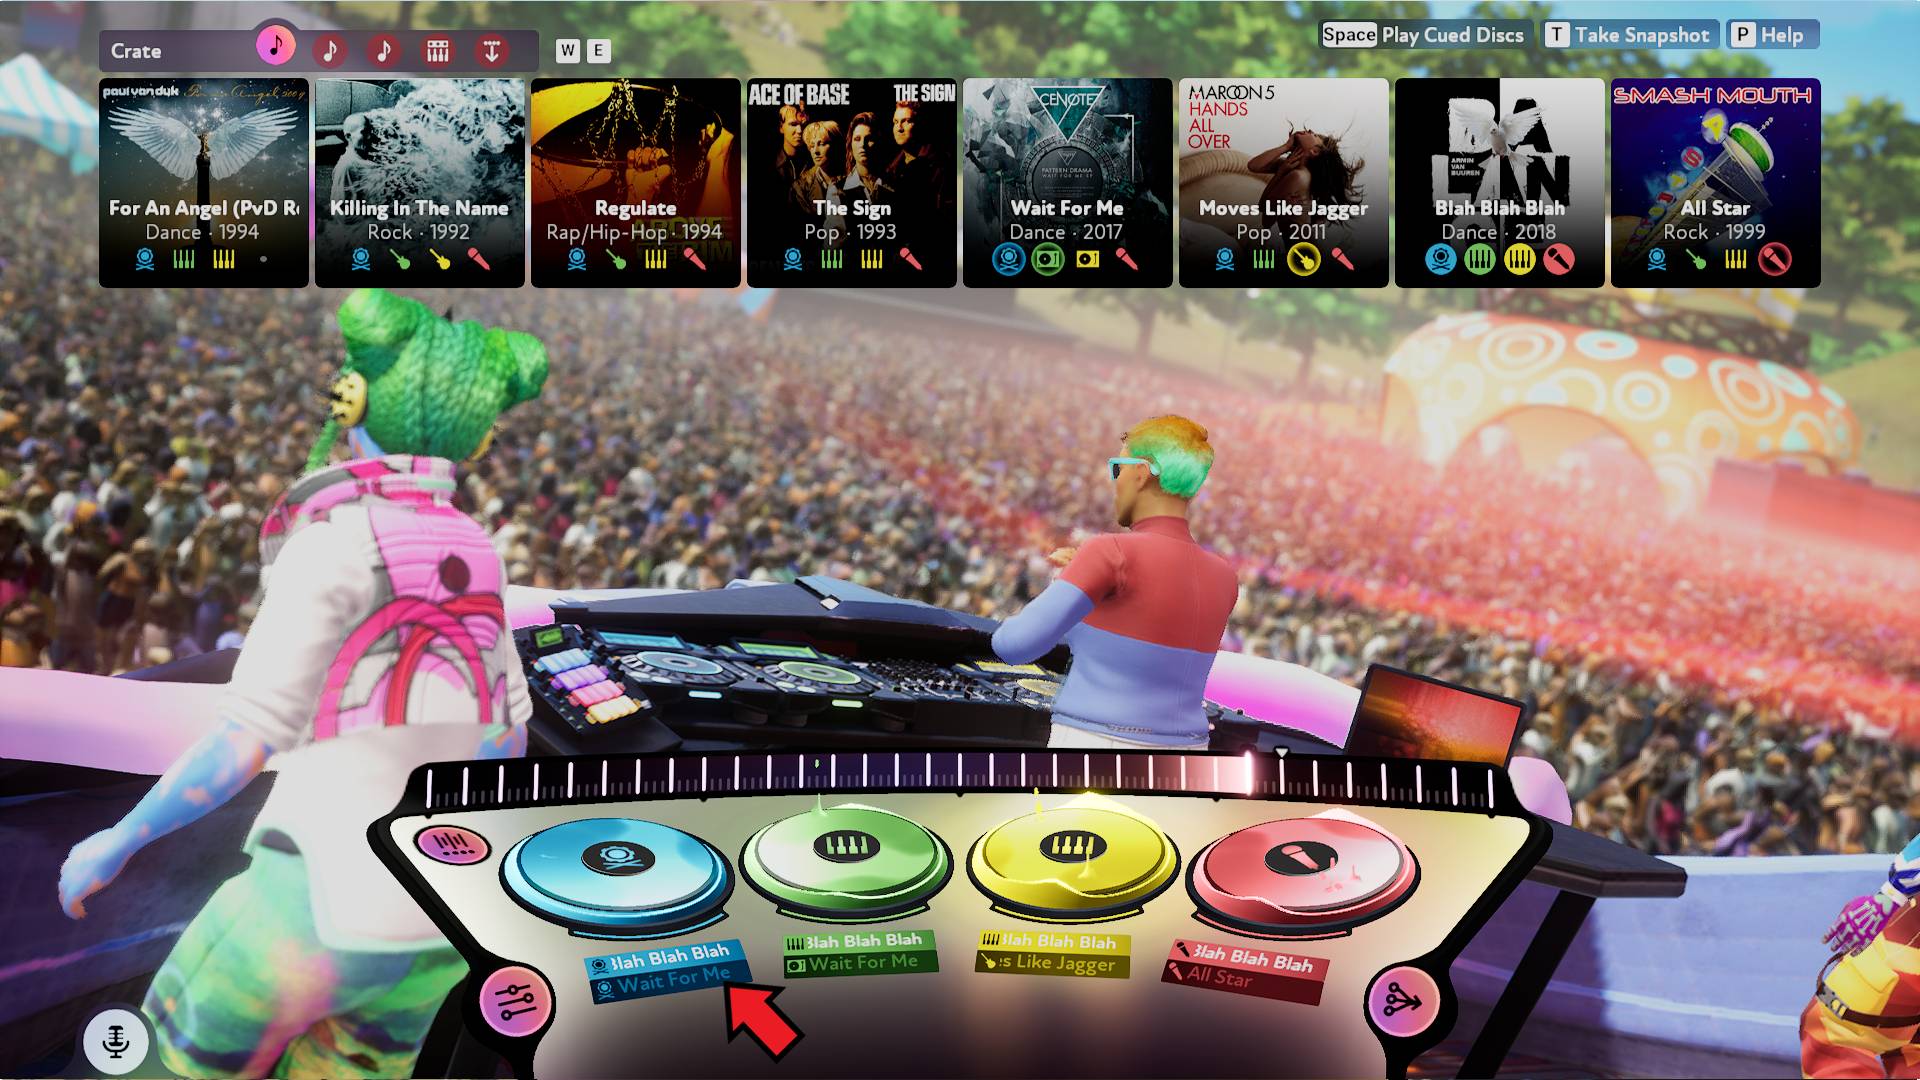 Best music games: a DJ plays music to a crowd